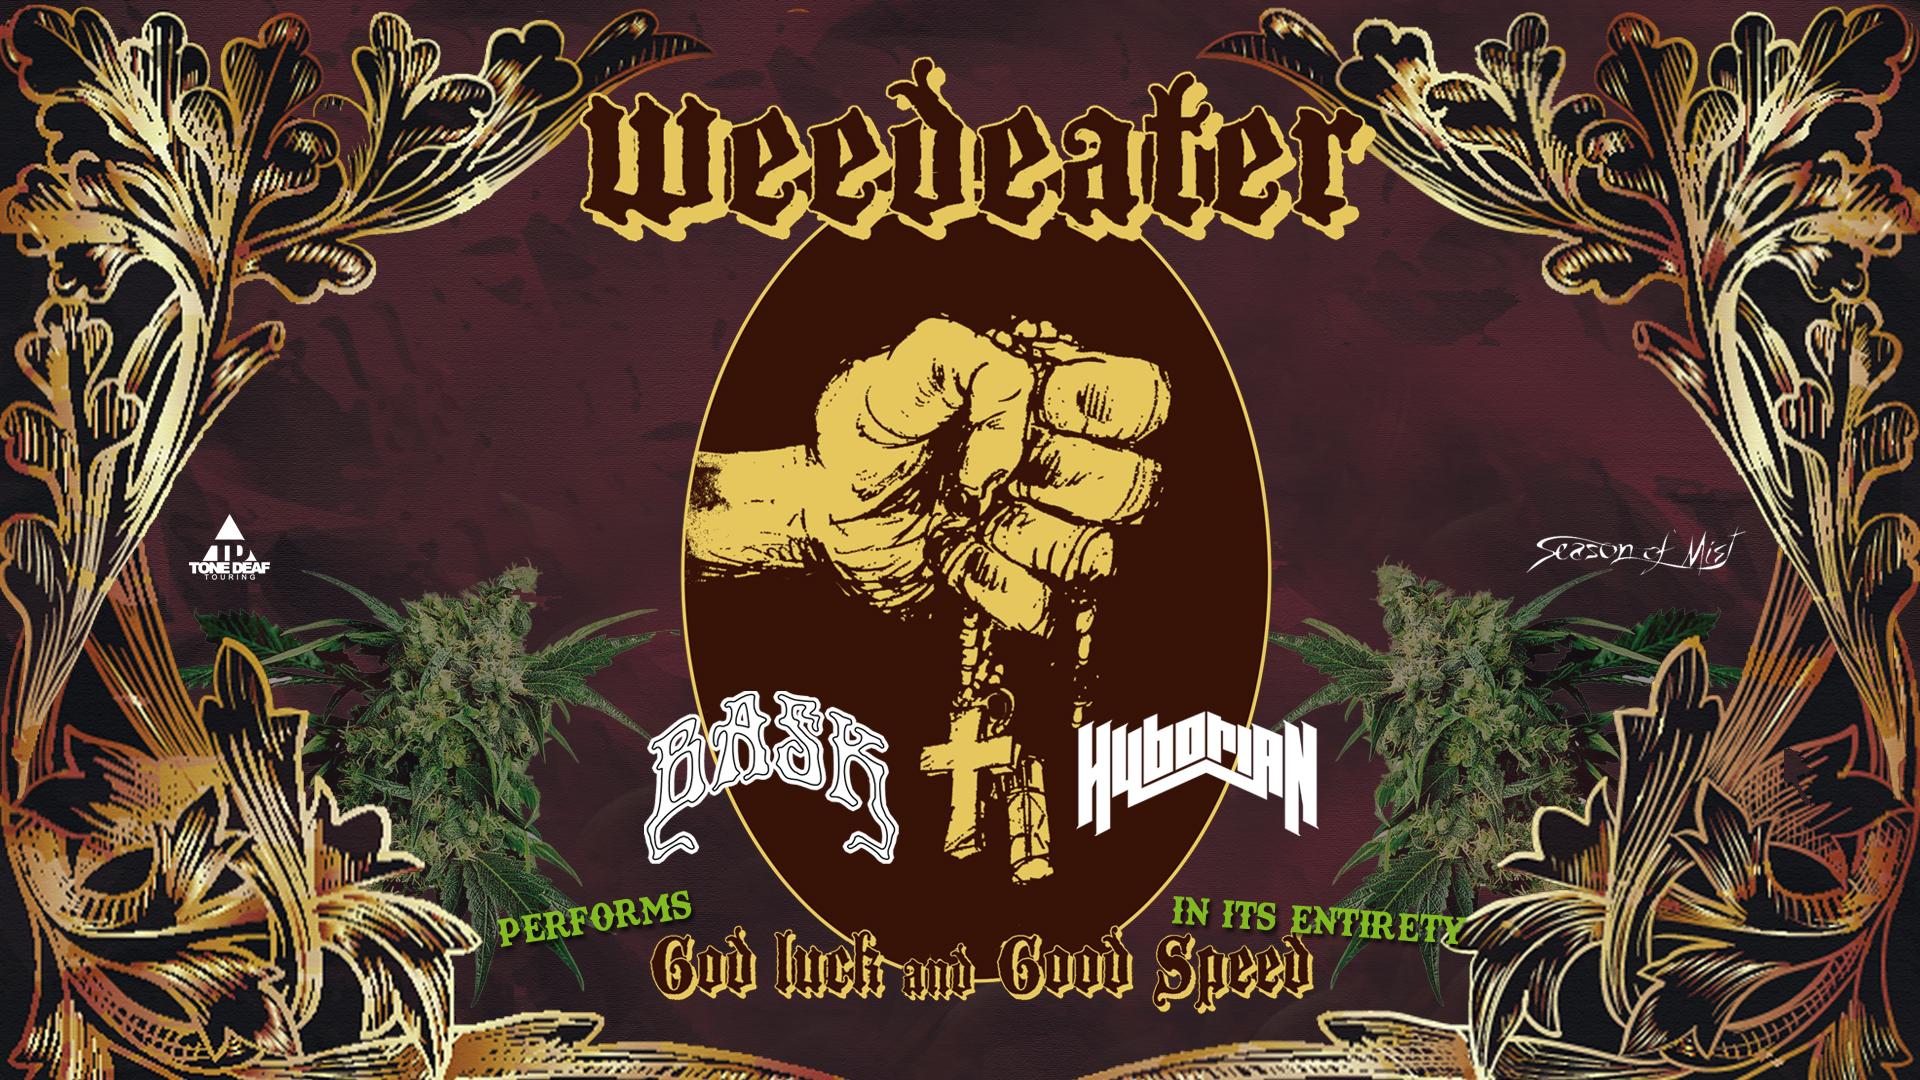 Weedeater performs 'God Luck and Good Speed' / Bask / Hyborian